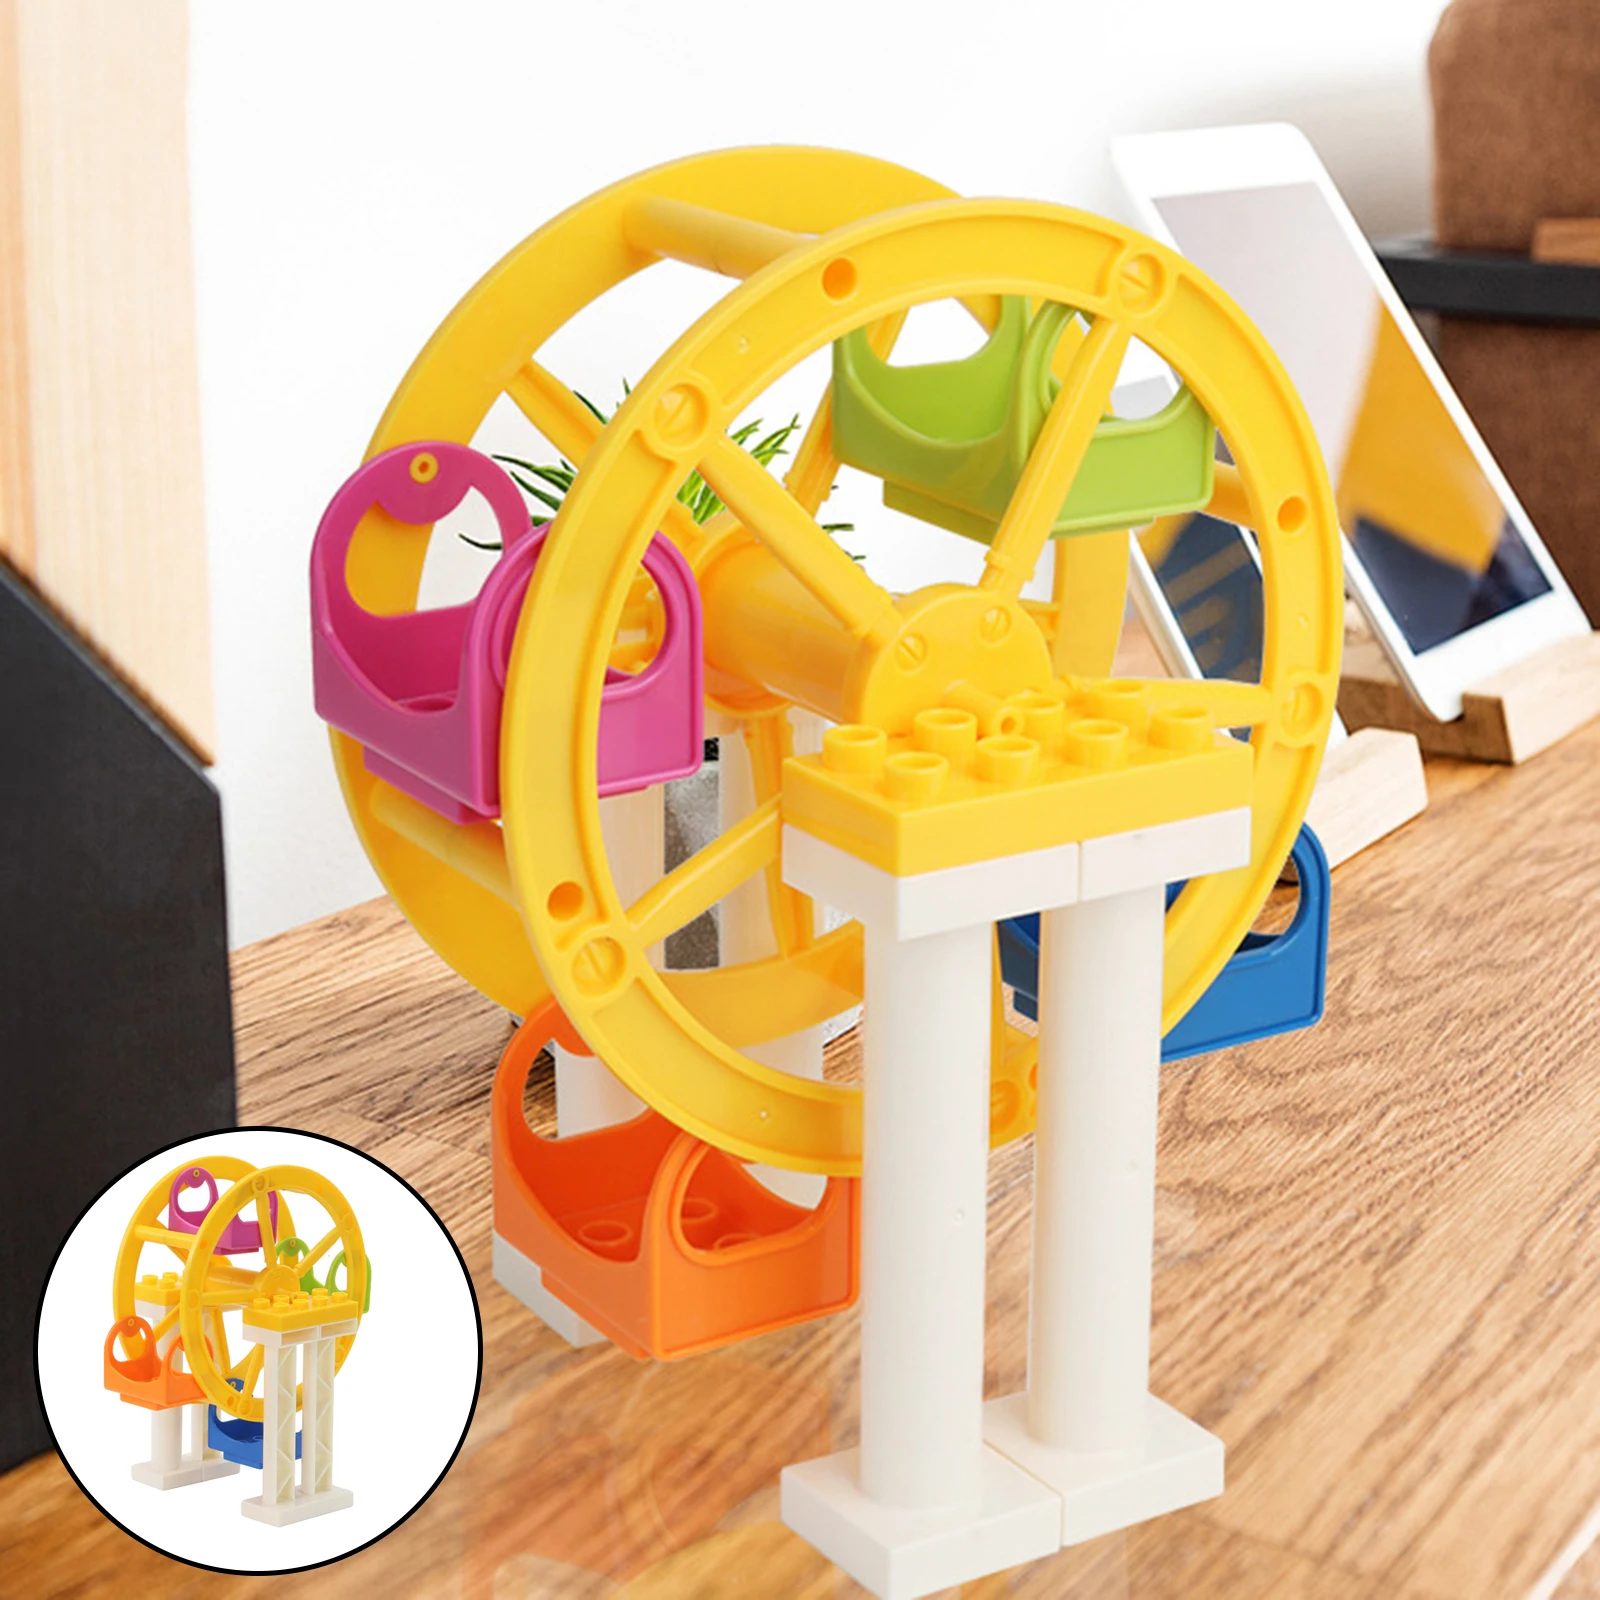 Building Blocks Kids Building Toys Early Learning Toy Amusement Park Accessory Collection Gifts for Boys Girls